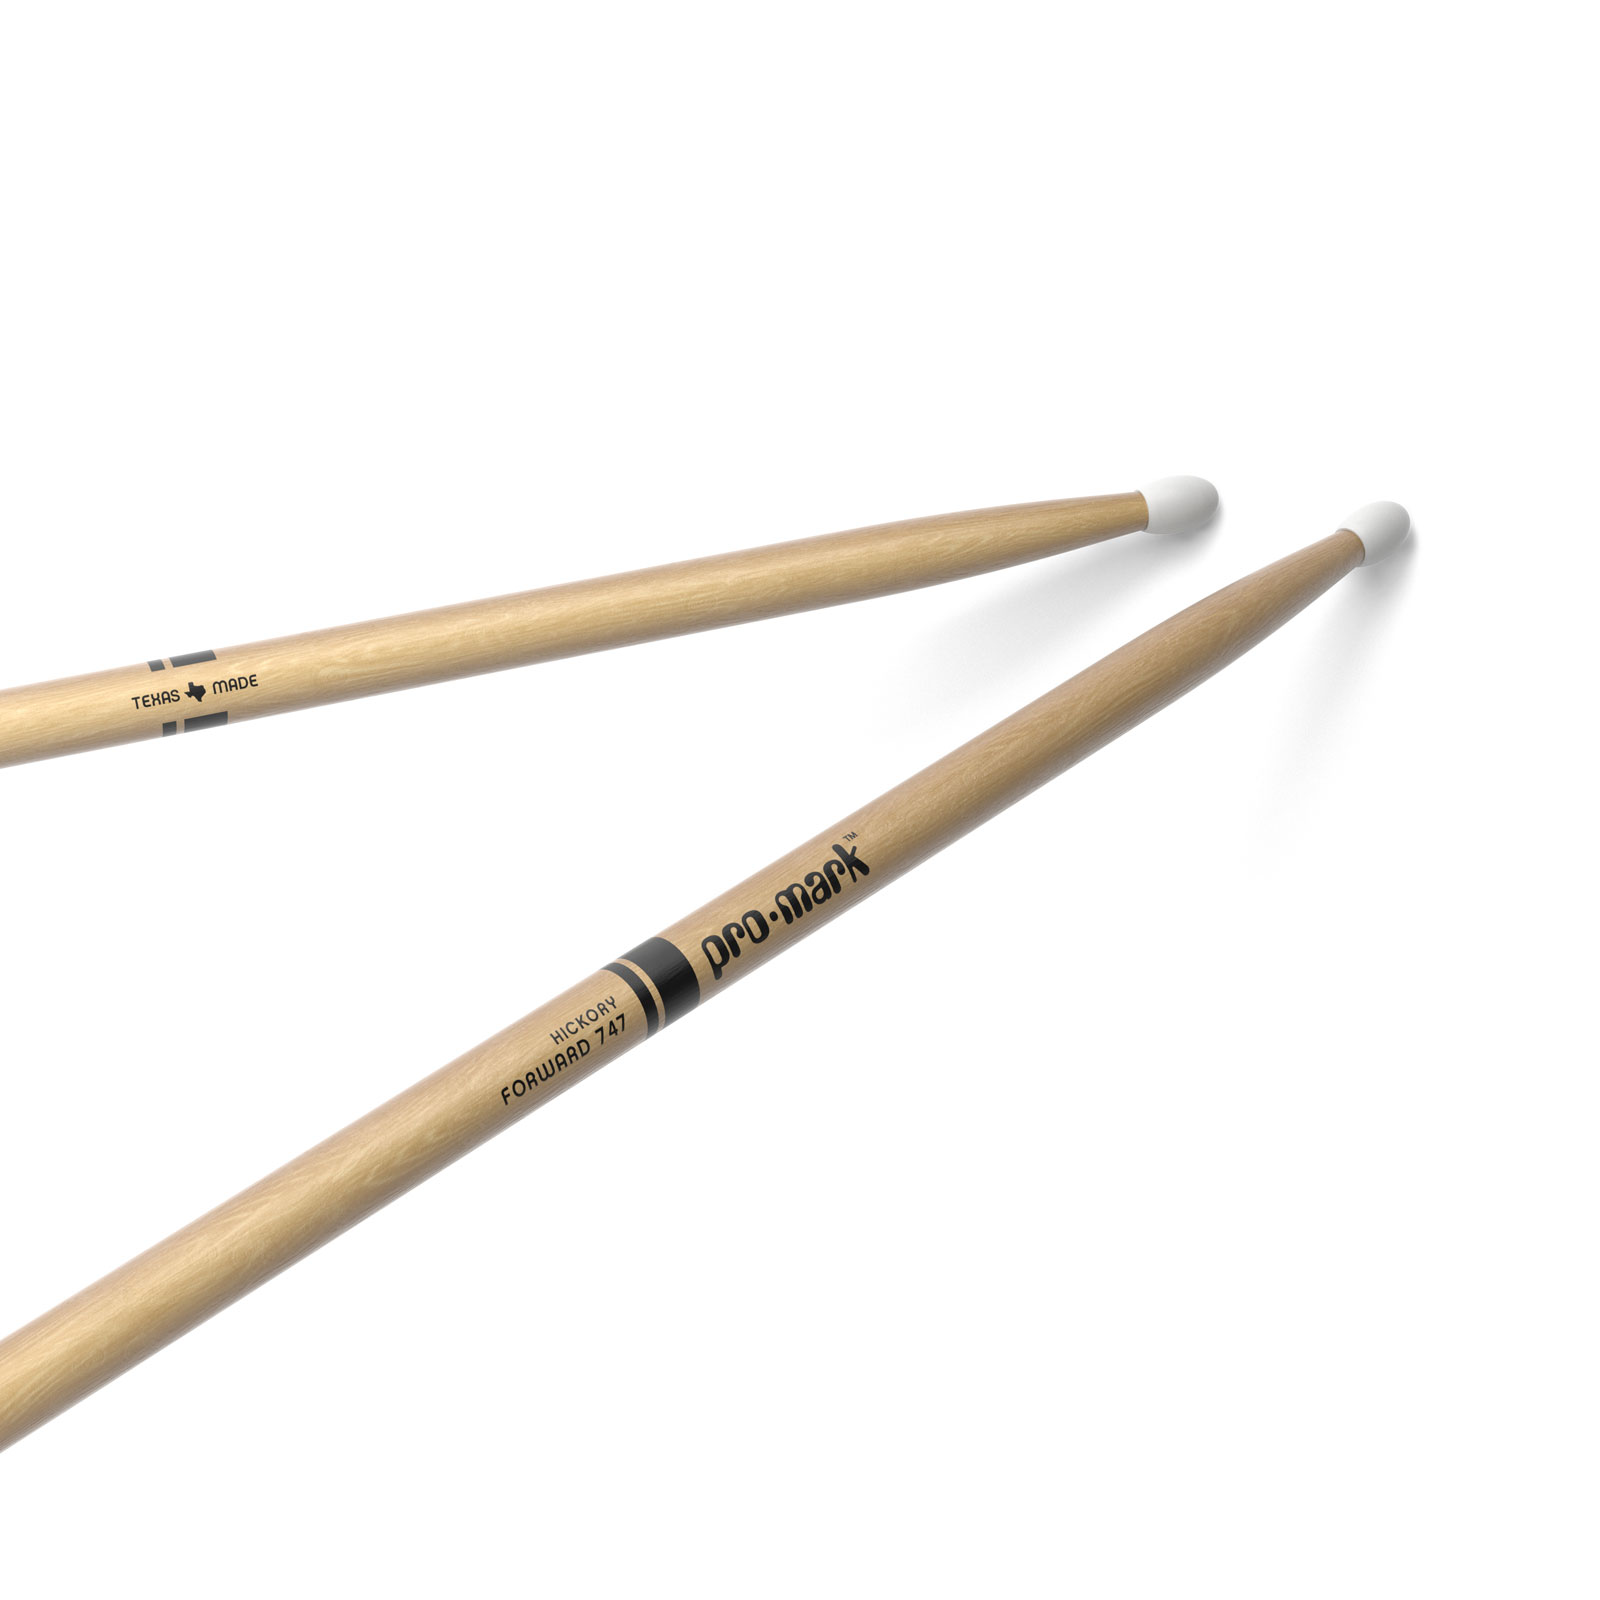 PRO MARK CLASSIC FORWARD 747 HICKORY DRUMSTICK OVAL NYLON TIP